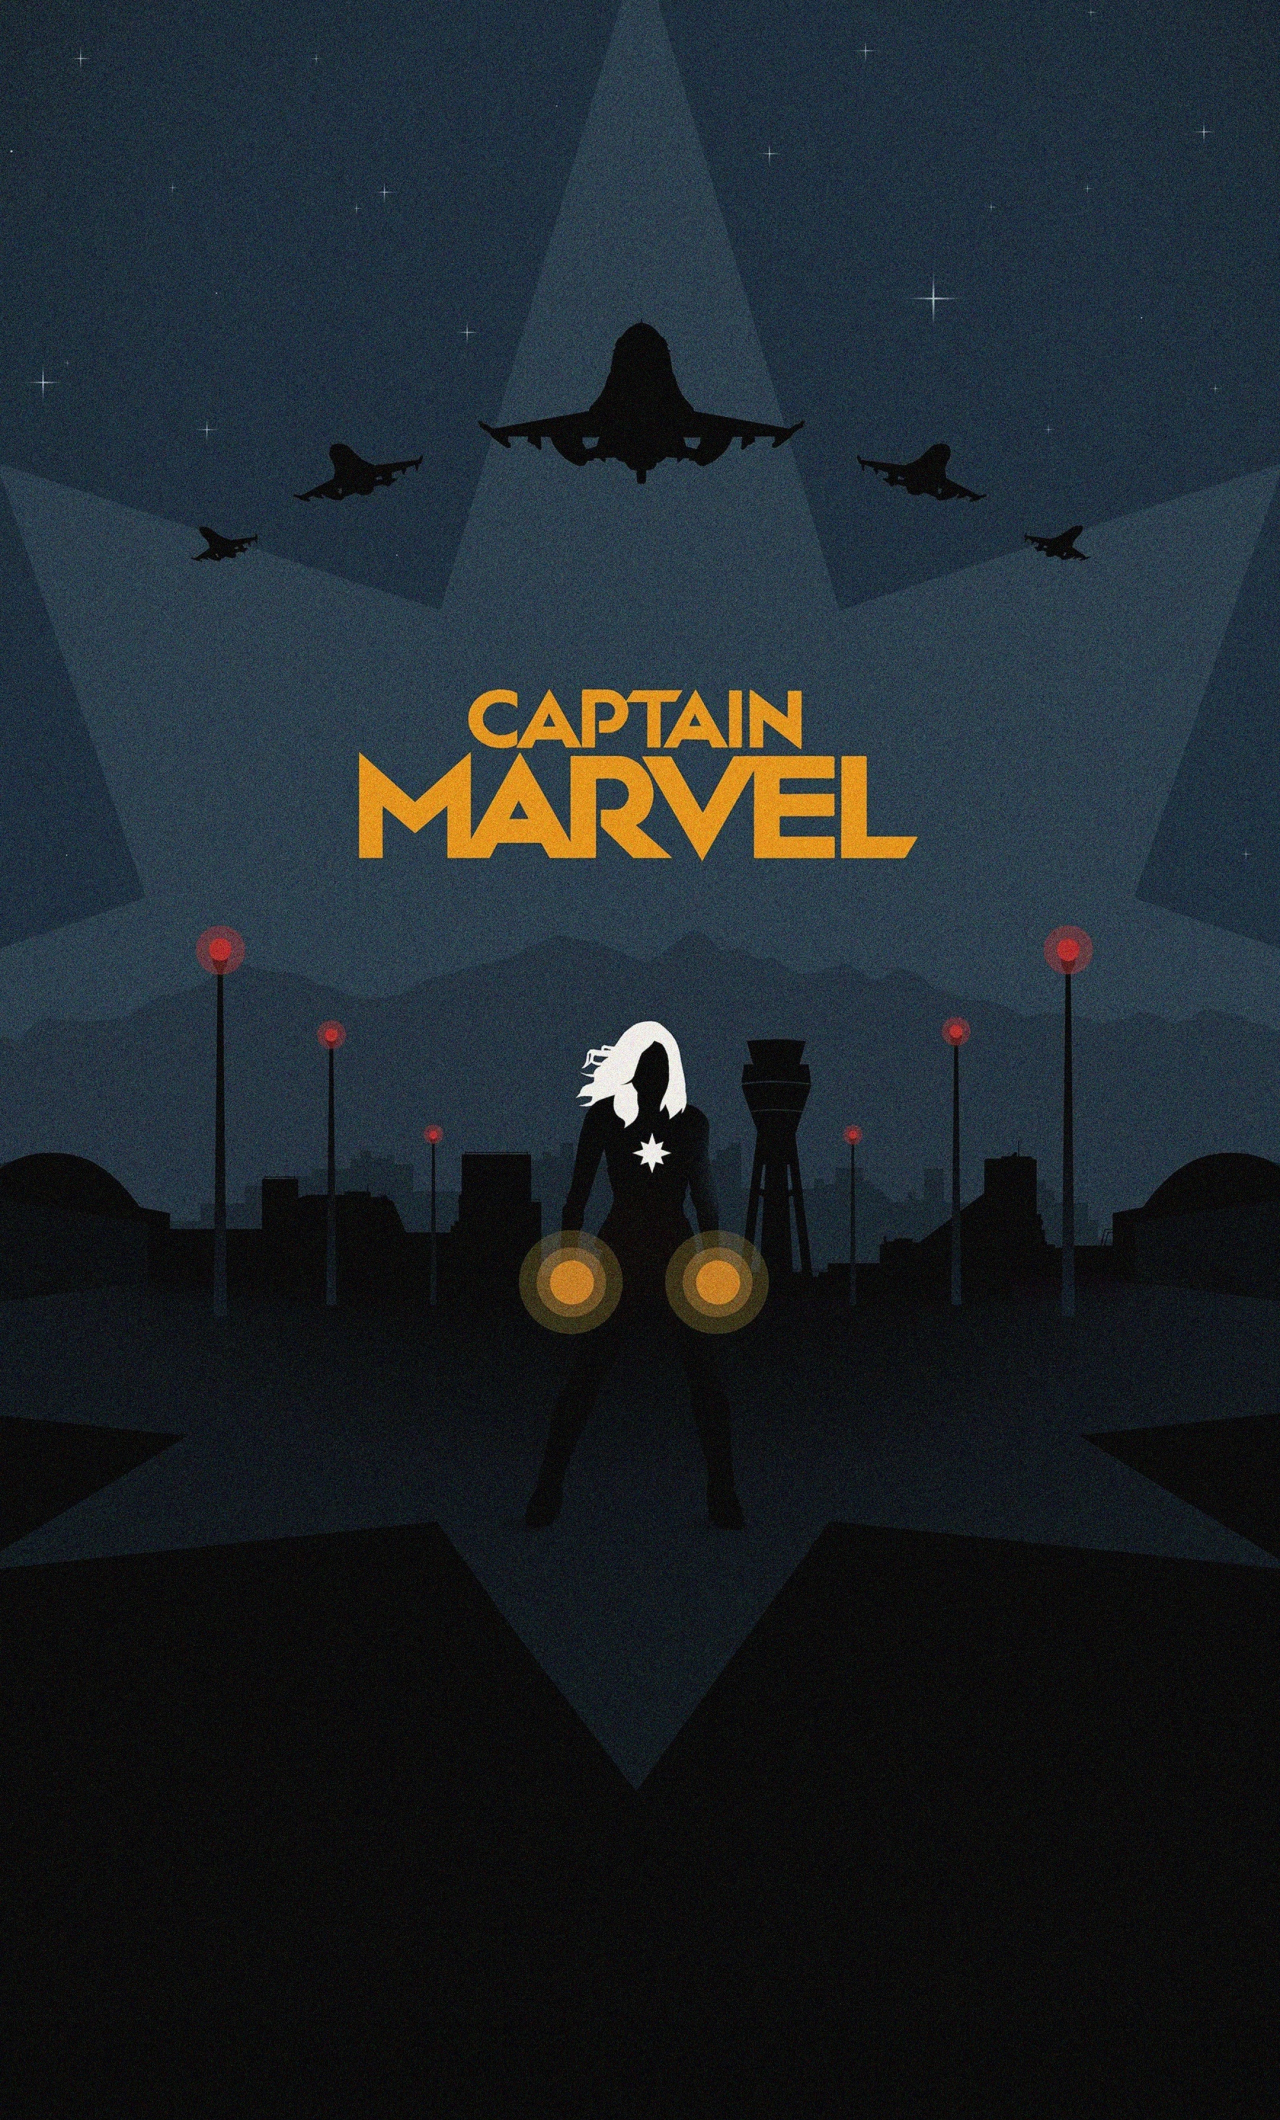 Download 1280x2120 wallpaper captain marvel, minimal, poster, iphone 6 plus, 1280x2120 HD image, background, 20624